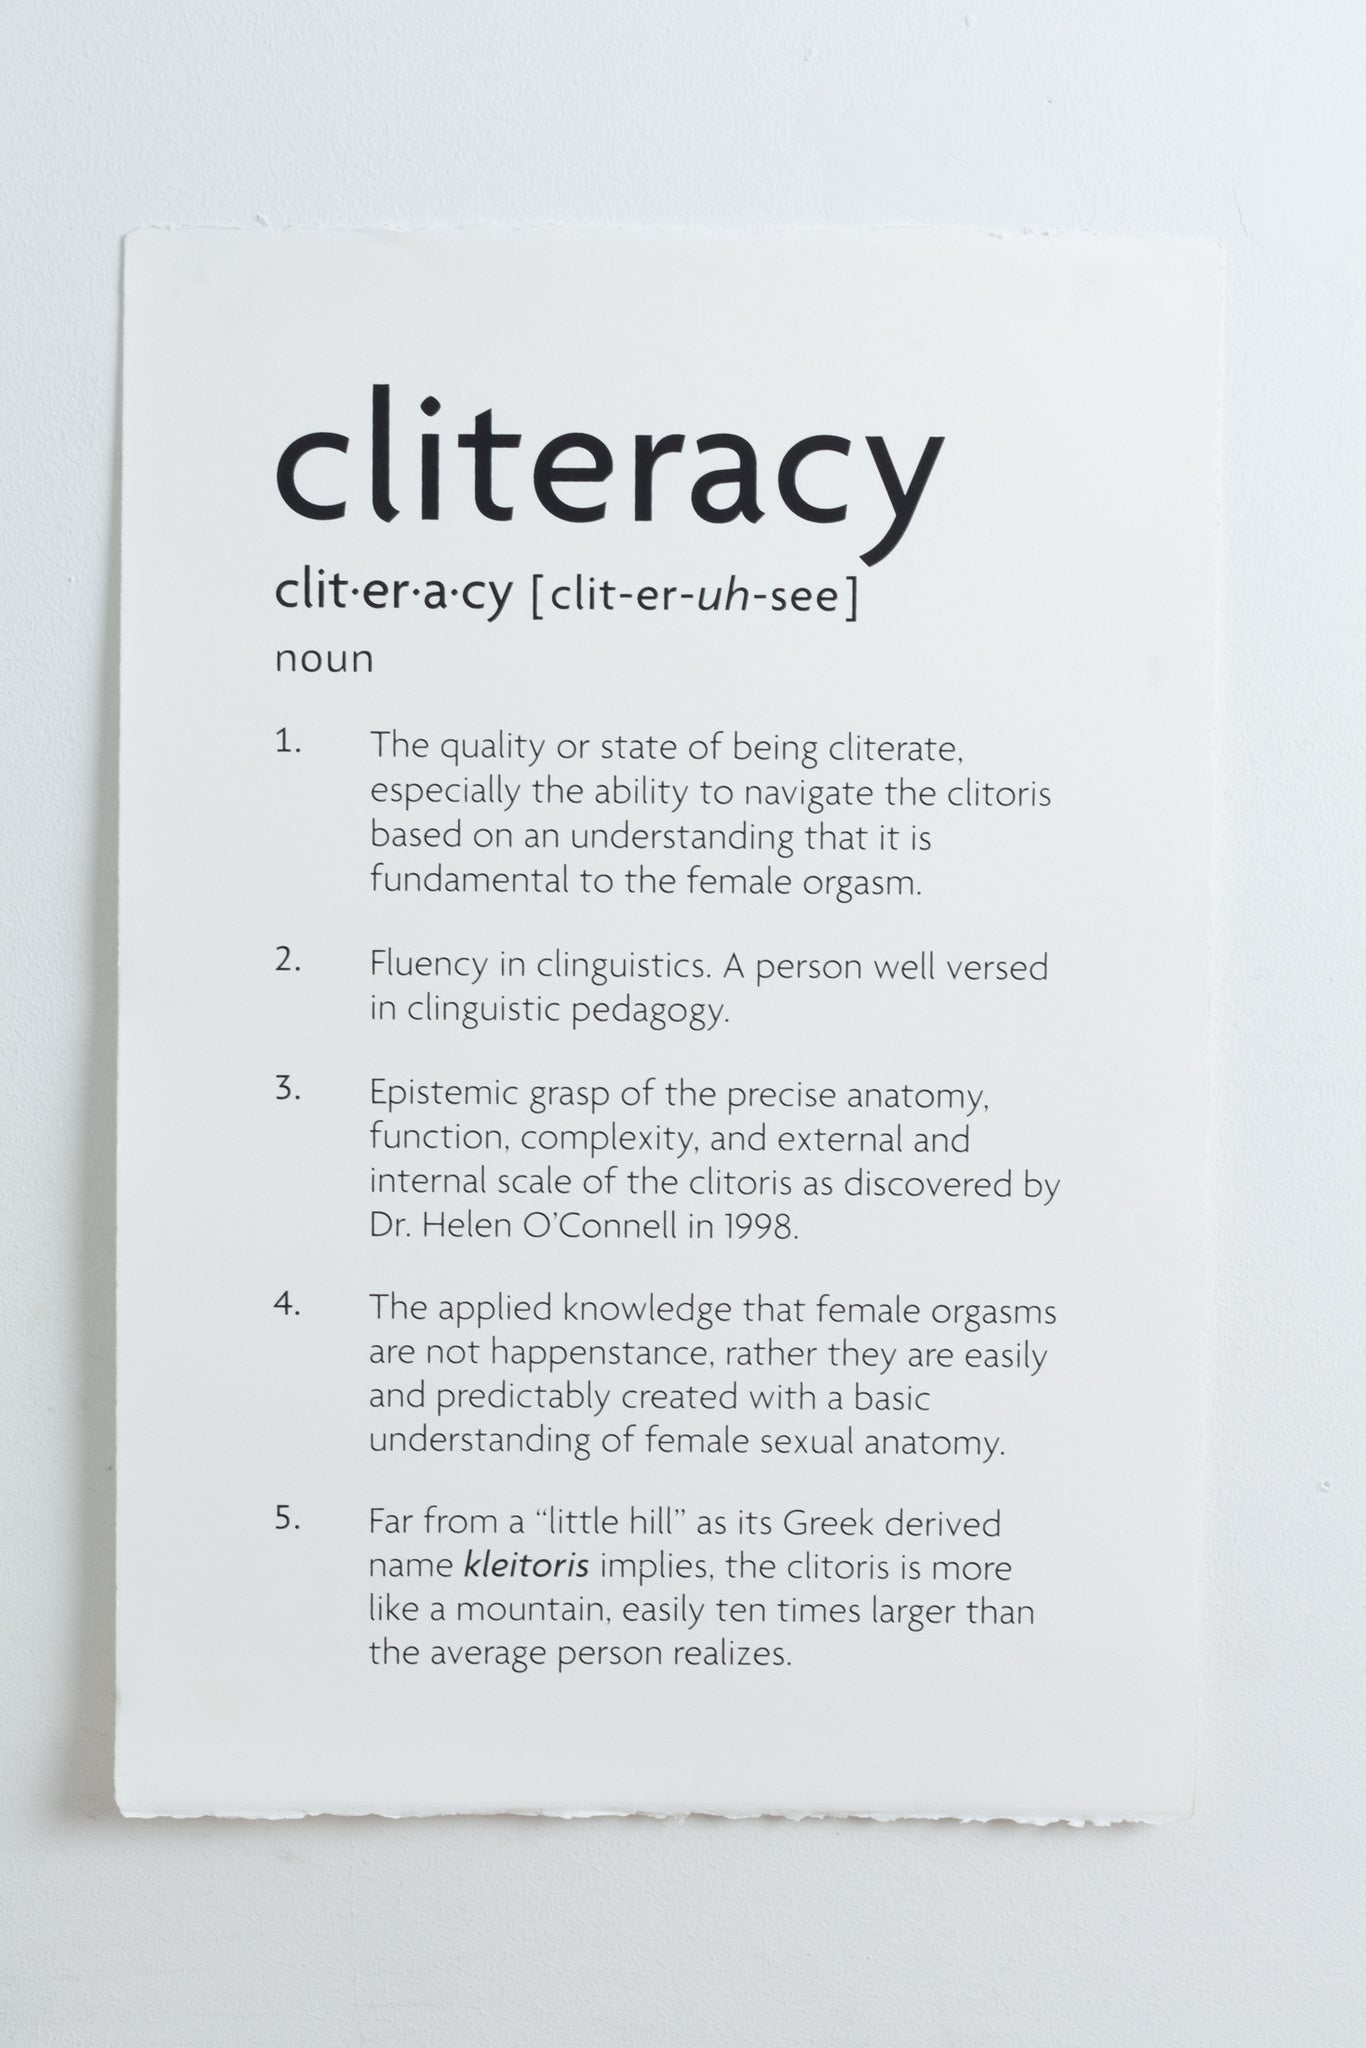 CLITERACY, Definition